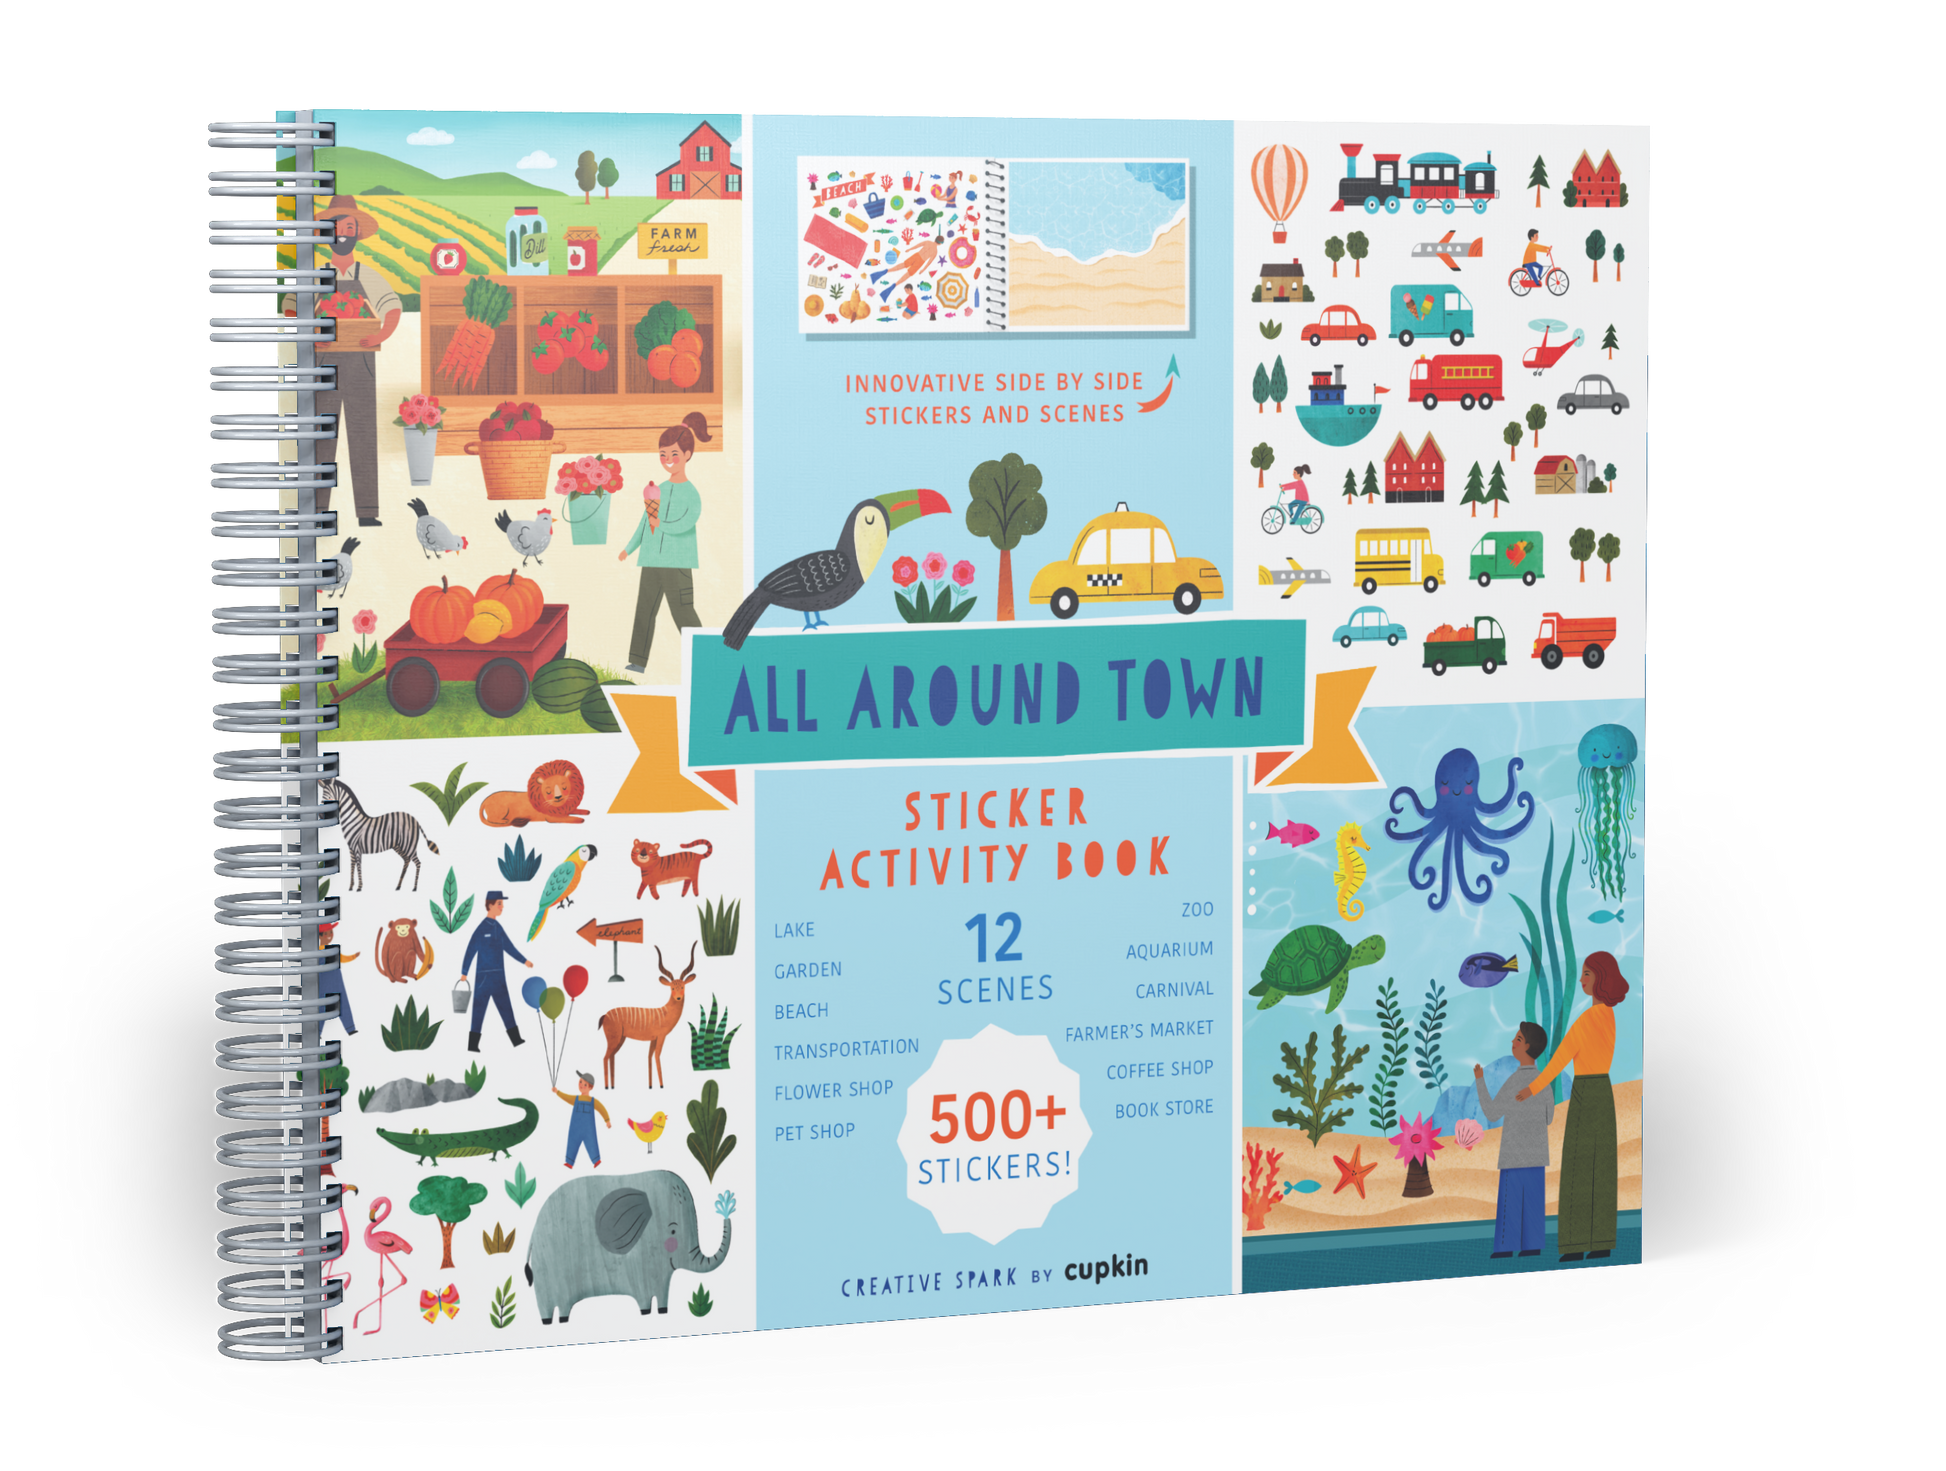 Food Truck Sticker + Coloring Book (500+ Stickers & 12 Scenes) by Cupkin -  Side by Side Sticker Adventure Time Activity Books fo